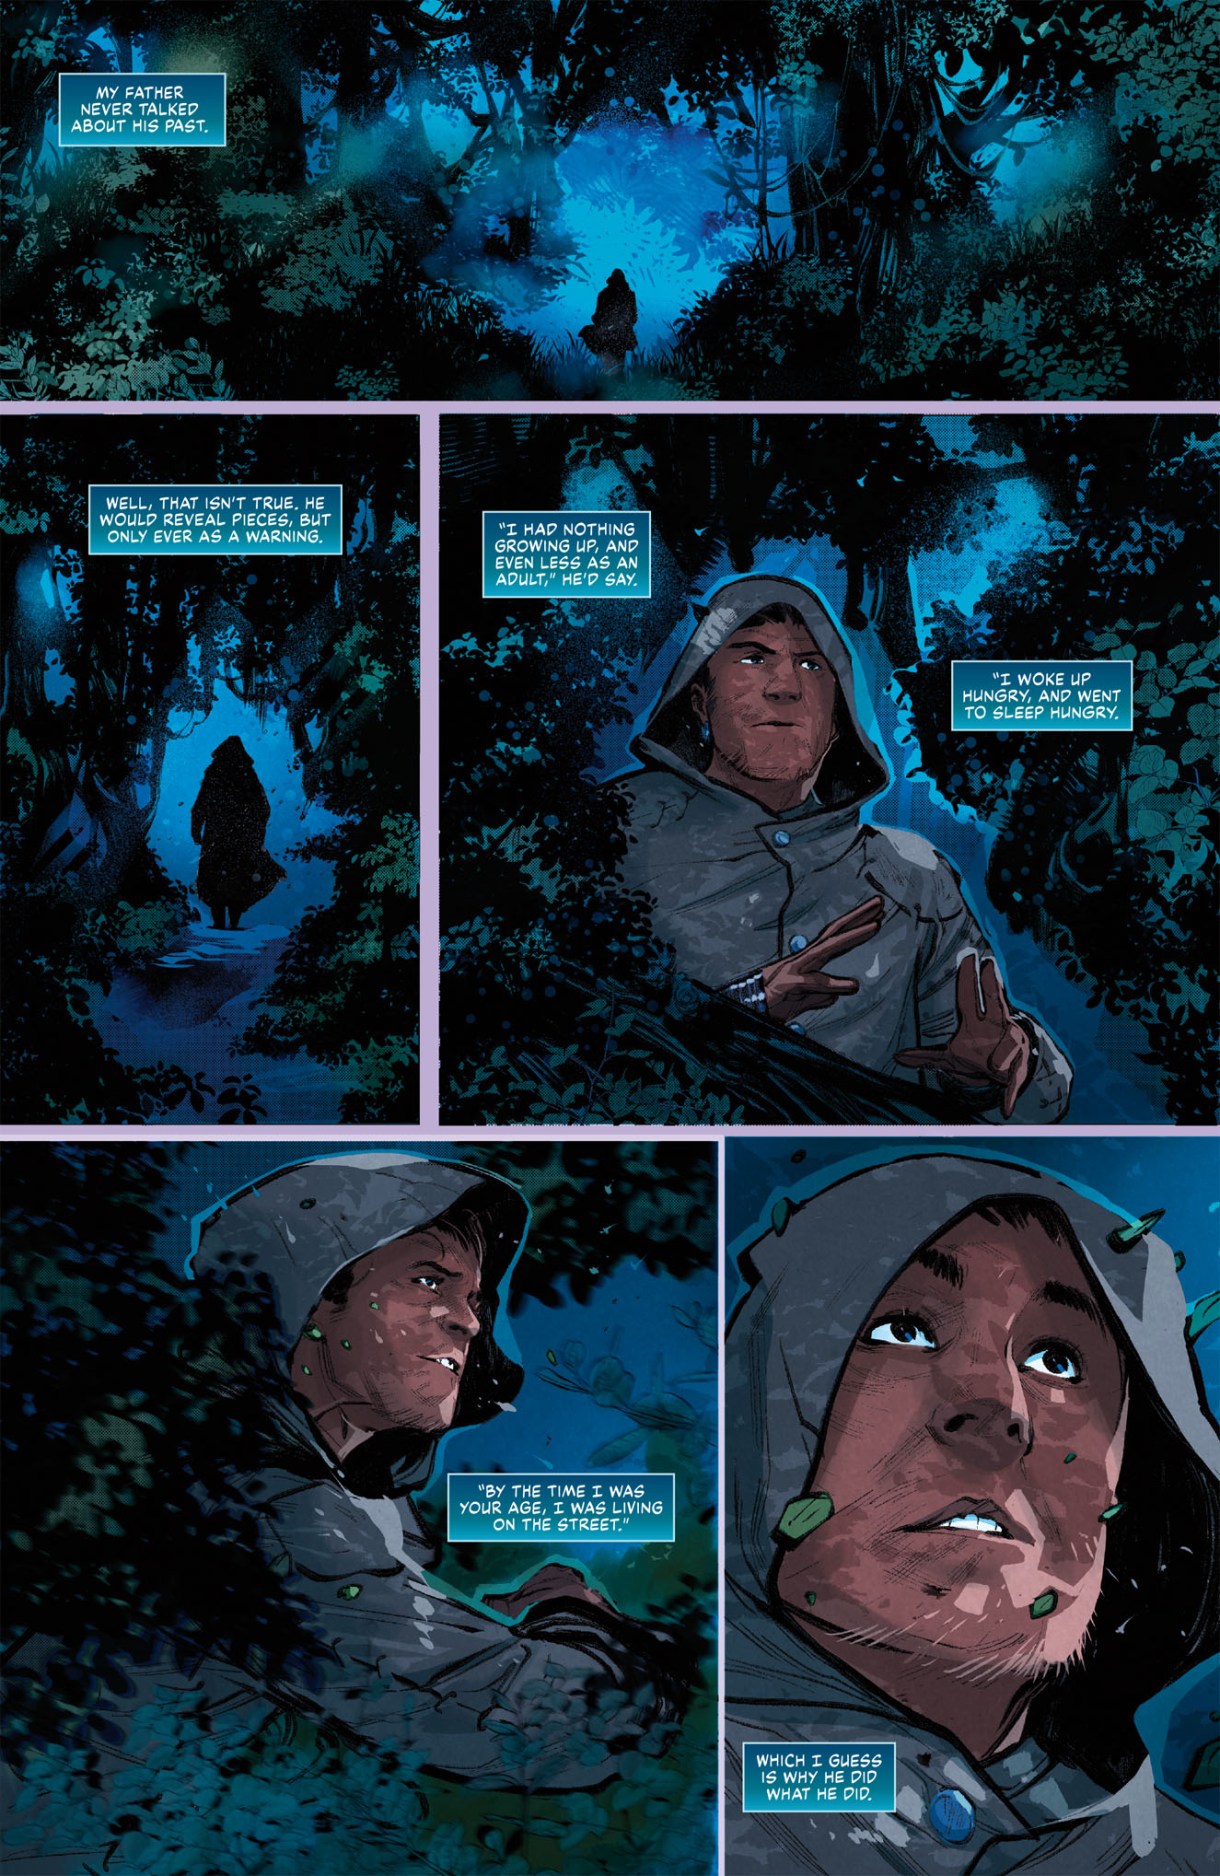 A five panel comic of a person walking through the woods at night, with the following narration: "MY FATHER NEVER TALKED ABOUT HIS PAST. WELL, THAT ISN'T TRUE. HE WOULD REVEAL PIECES, BUT ONLY EVER AS A WARNING. "I HAD NOTHING GROWING UP, AND EVEN LESS AS AN ADULT," HE'D SAY. "I WOKE UP HUNGRY, AND WENT TO SLEEP HUNGRY. "BY THE TIME I WAS YOUR AGE, I WAS LIVING ON THE STREET" WHICH I GUESS IS WHY HE DID WHAT HE DID"